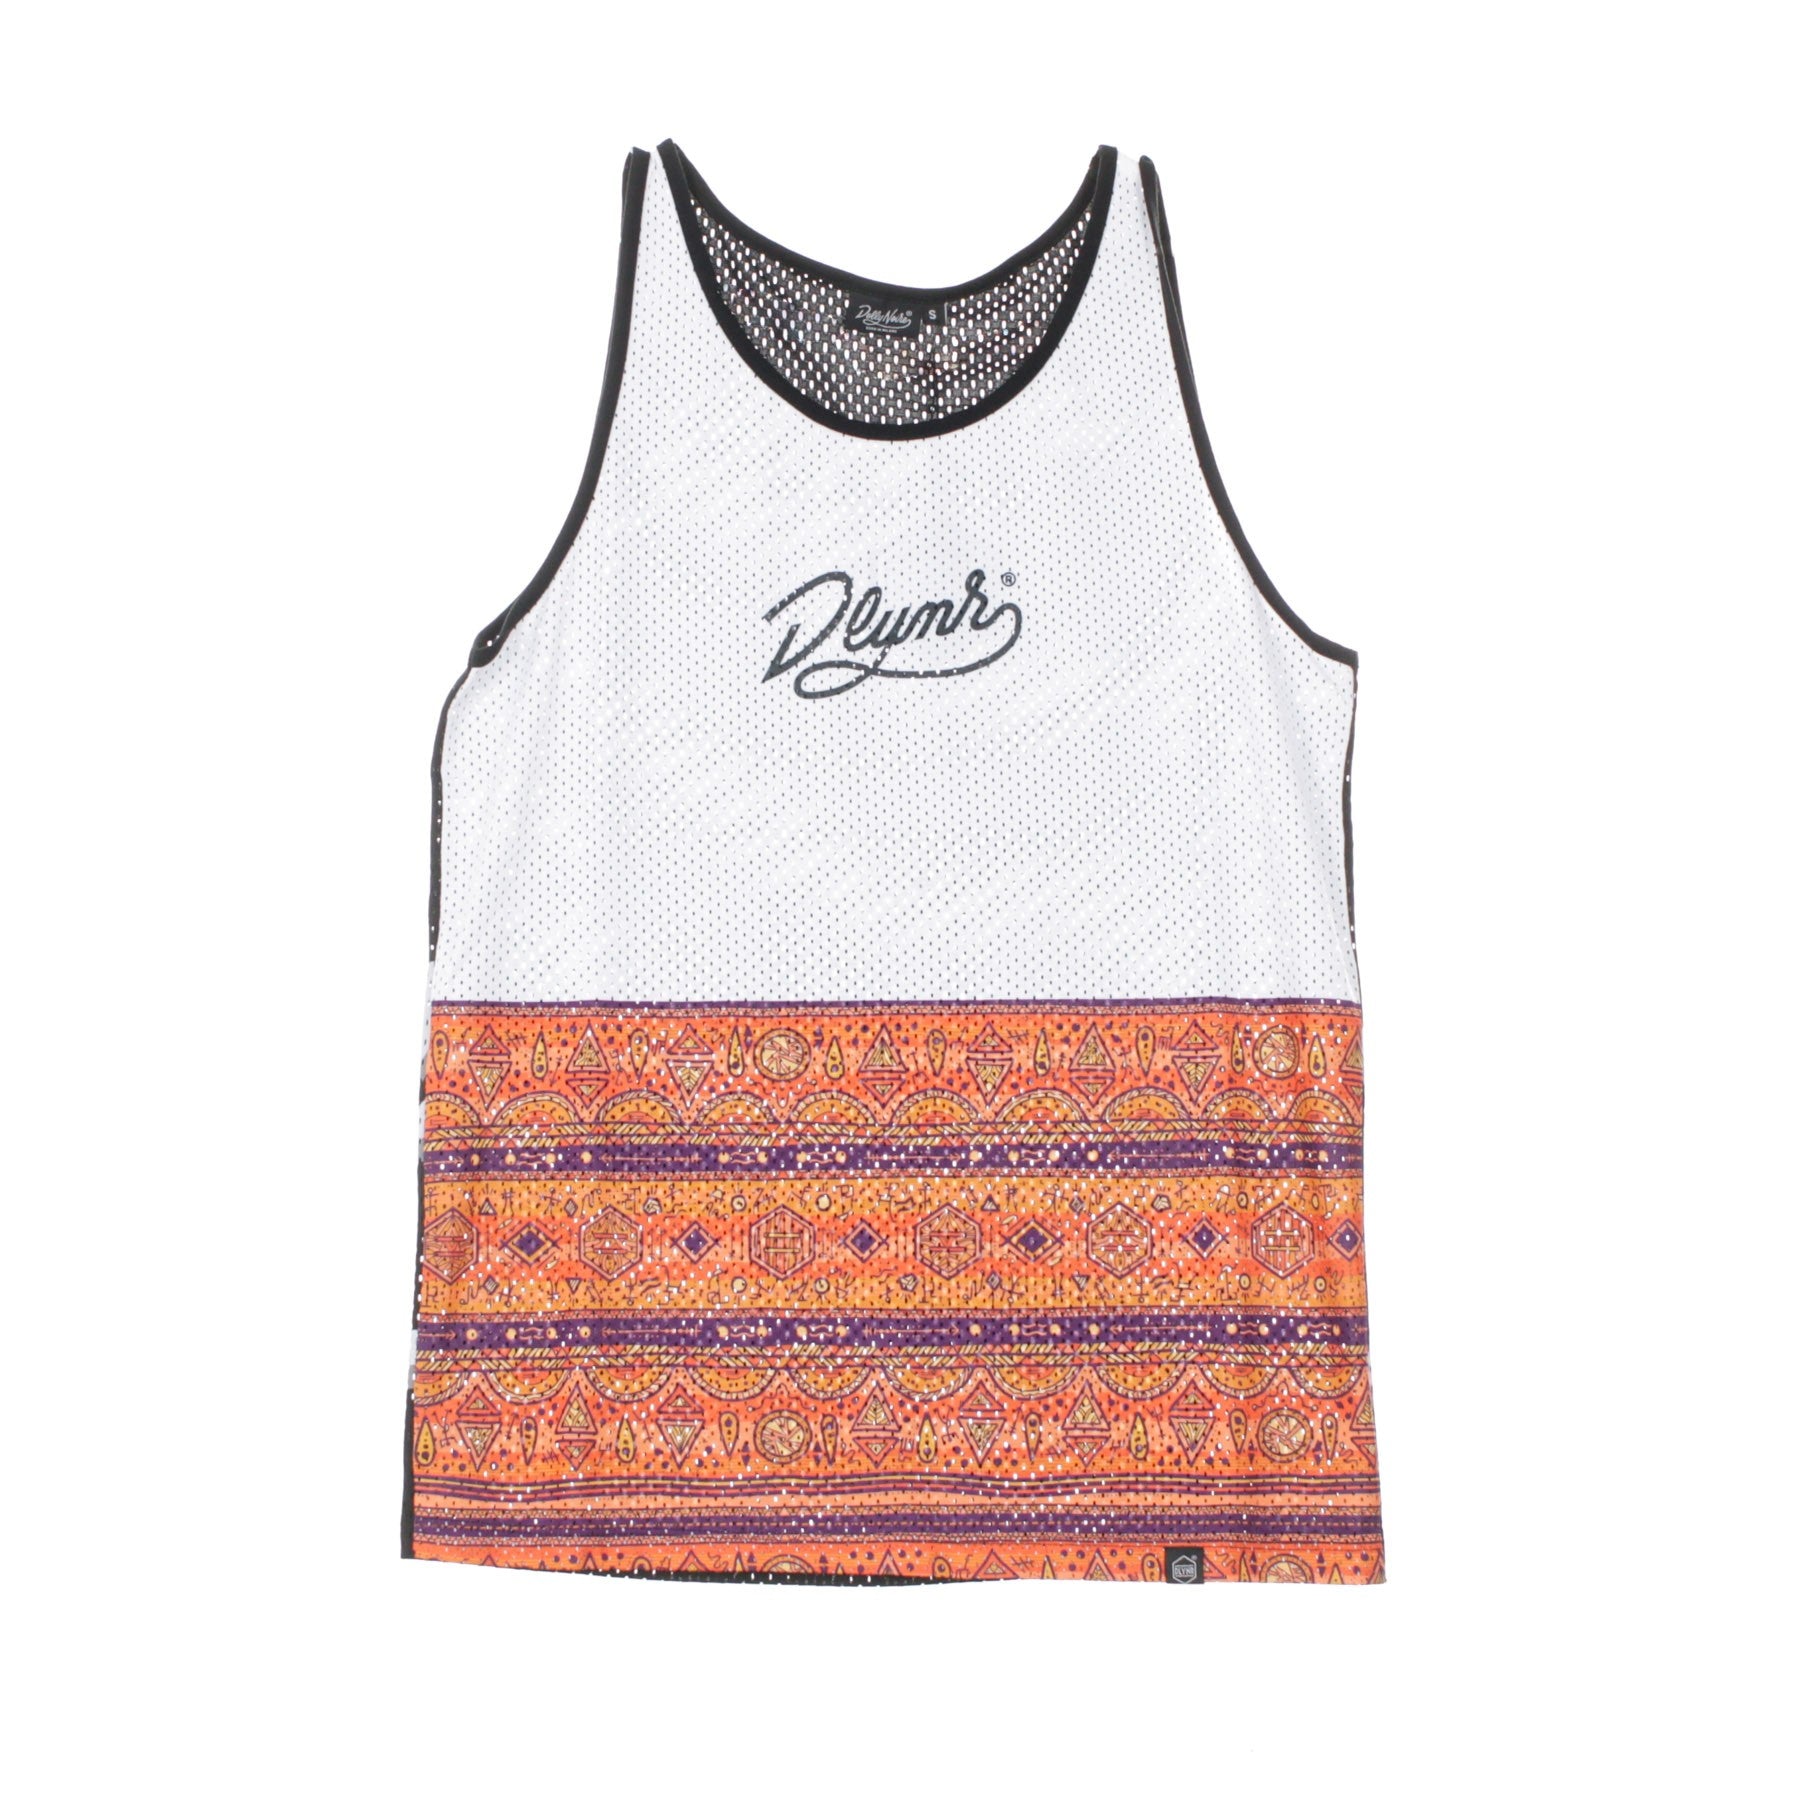 Dolly Noire, Canotta Tipo Basket Uomo Hal Africa Tank Top, White/multi